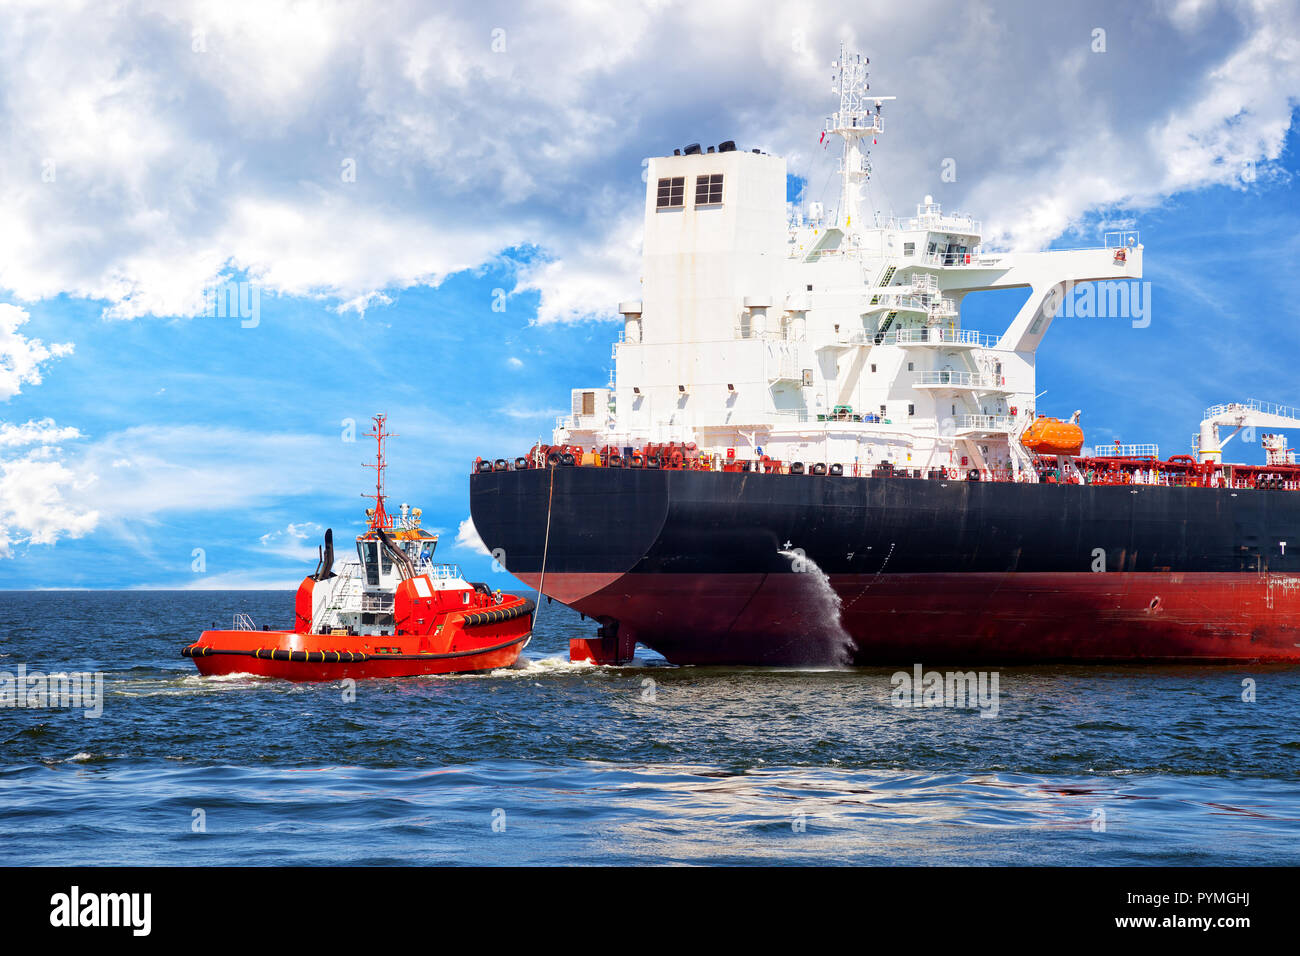 Red tug boat approaching to assist tanker Stock Photo